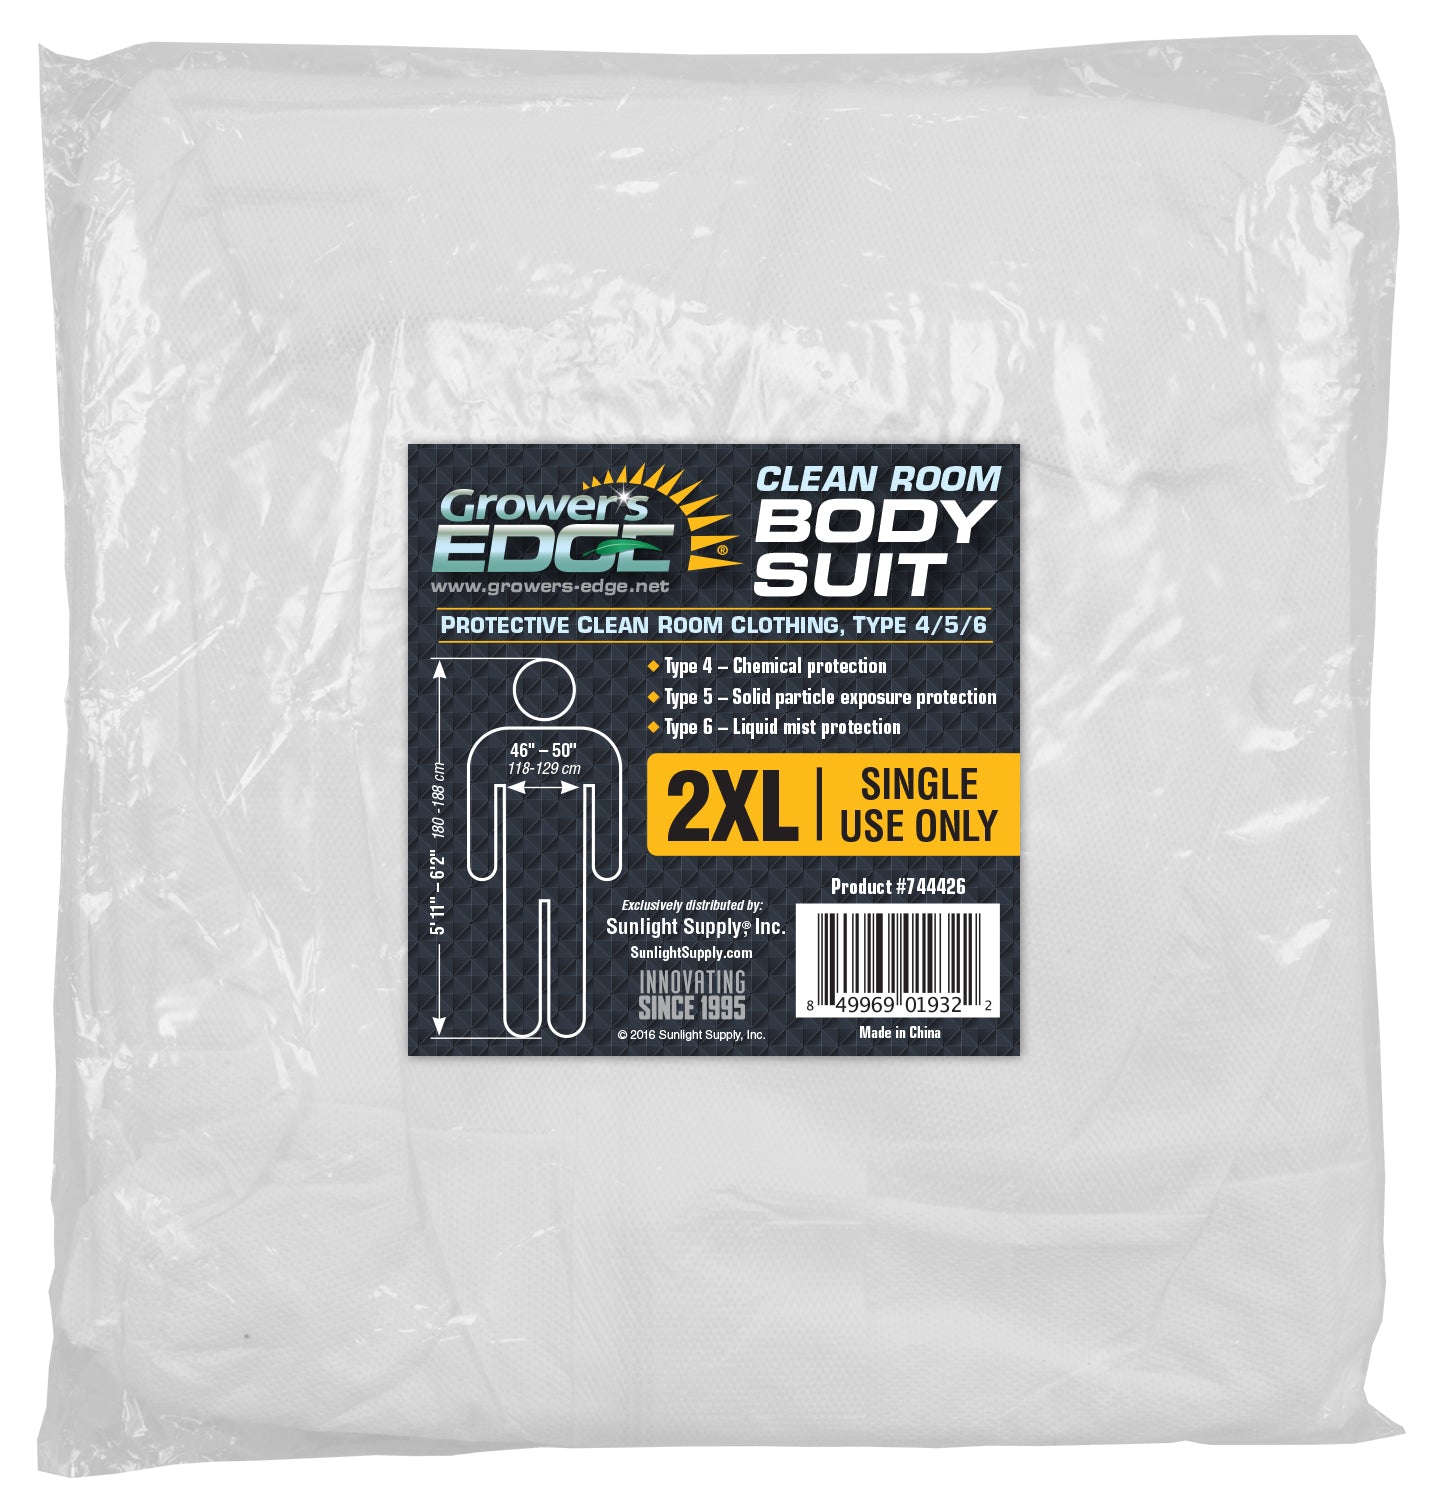 Grower's Edge Clean Room Body Suit - Size XXL 